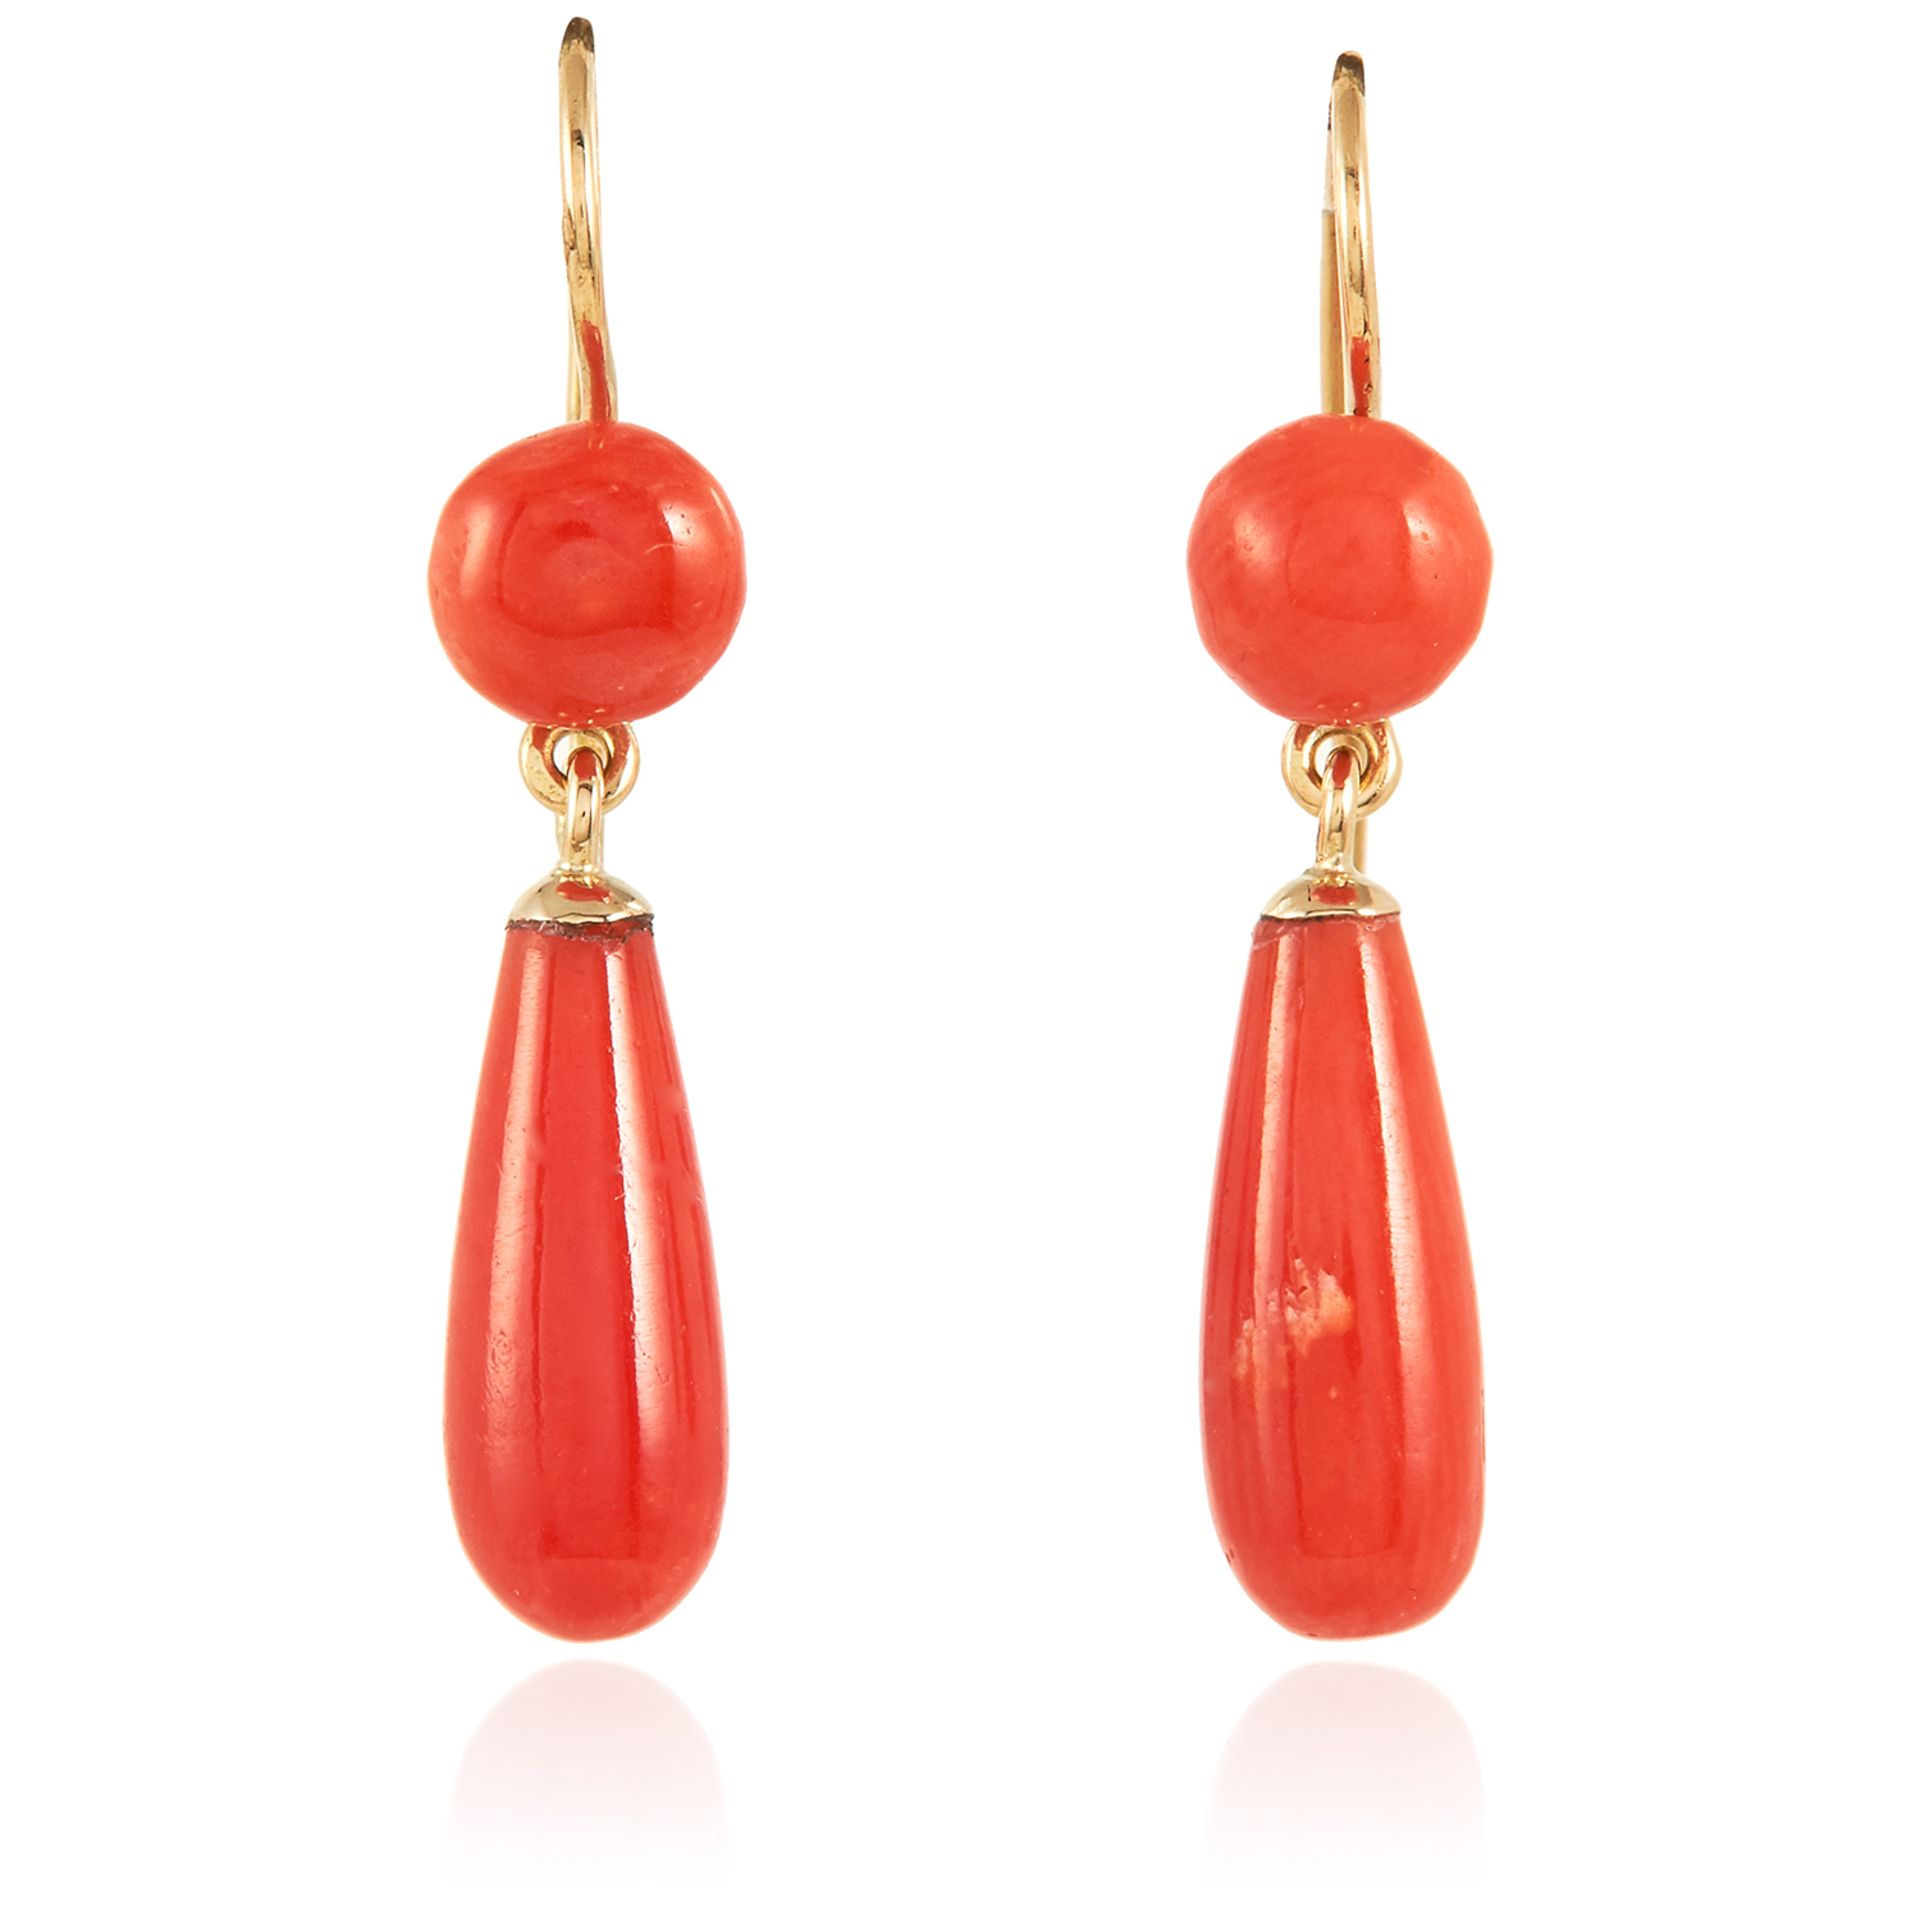 A PAIR OF ANTIQUE CORAL DROP EARRINGS in high carat yellow gold, each suspending a polished coral